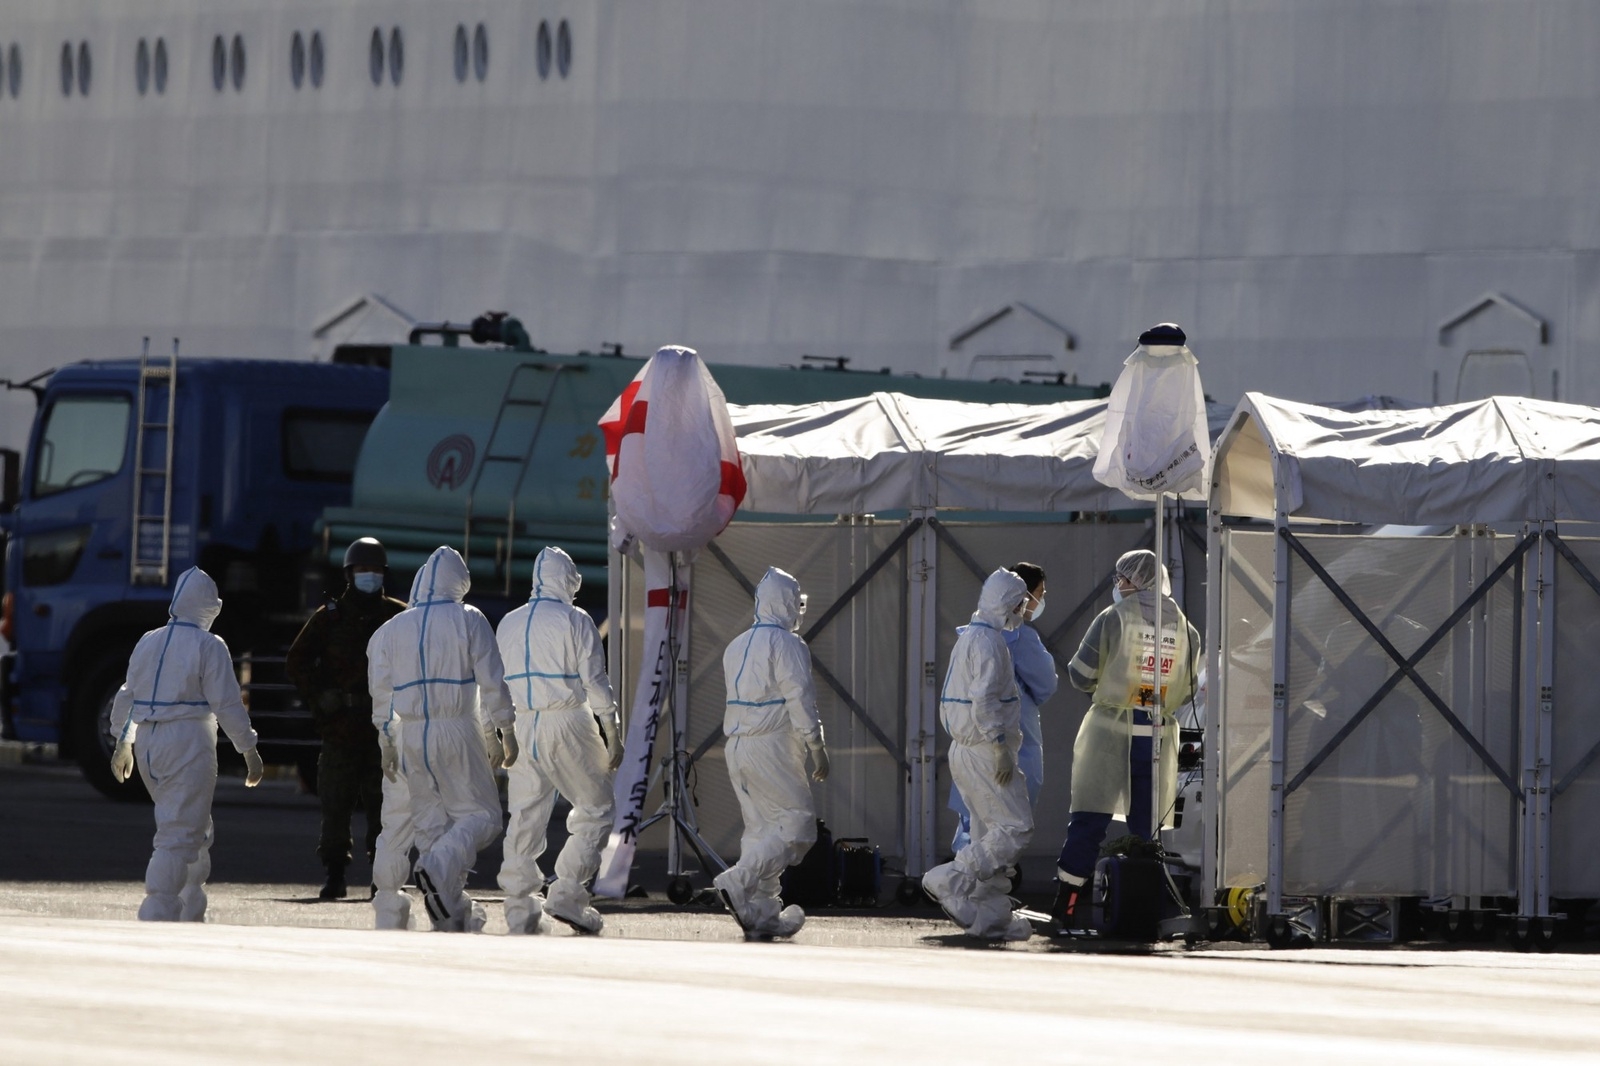 Medical workers with protective suites enter the quarantined Diamond Princess cruise ship docked in the Yokohama Port in Yokohama, near Tokyo, Tuesday, Feb. 11, 2020. Japan's Health Minister Katsunobu Kato said the government was considering testing everyone remaining on board and crew on the Diamond Princess, which would require them to remain aboard until results were available. (AP Photo/Jae C. Hong)  XJH104